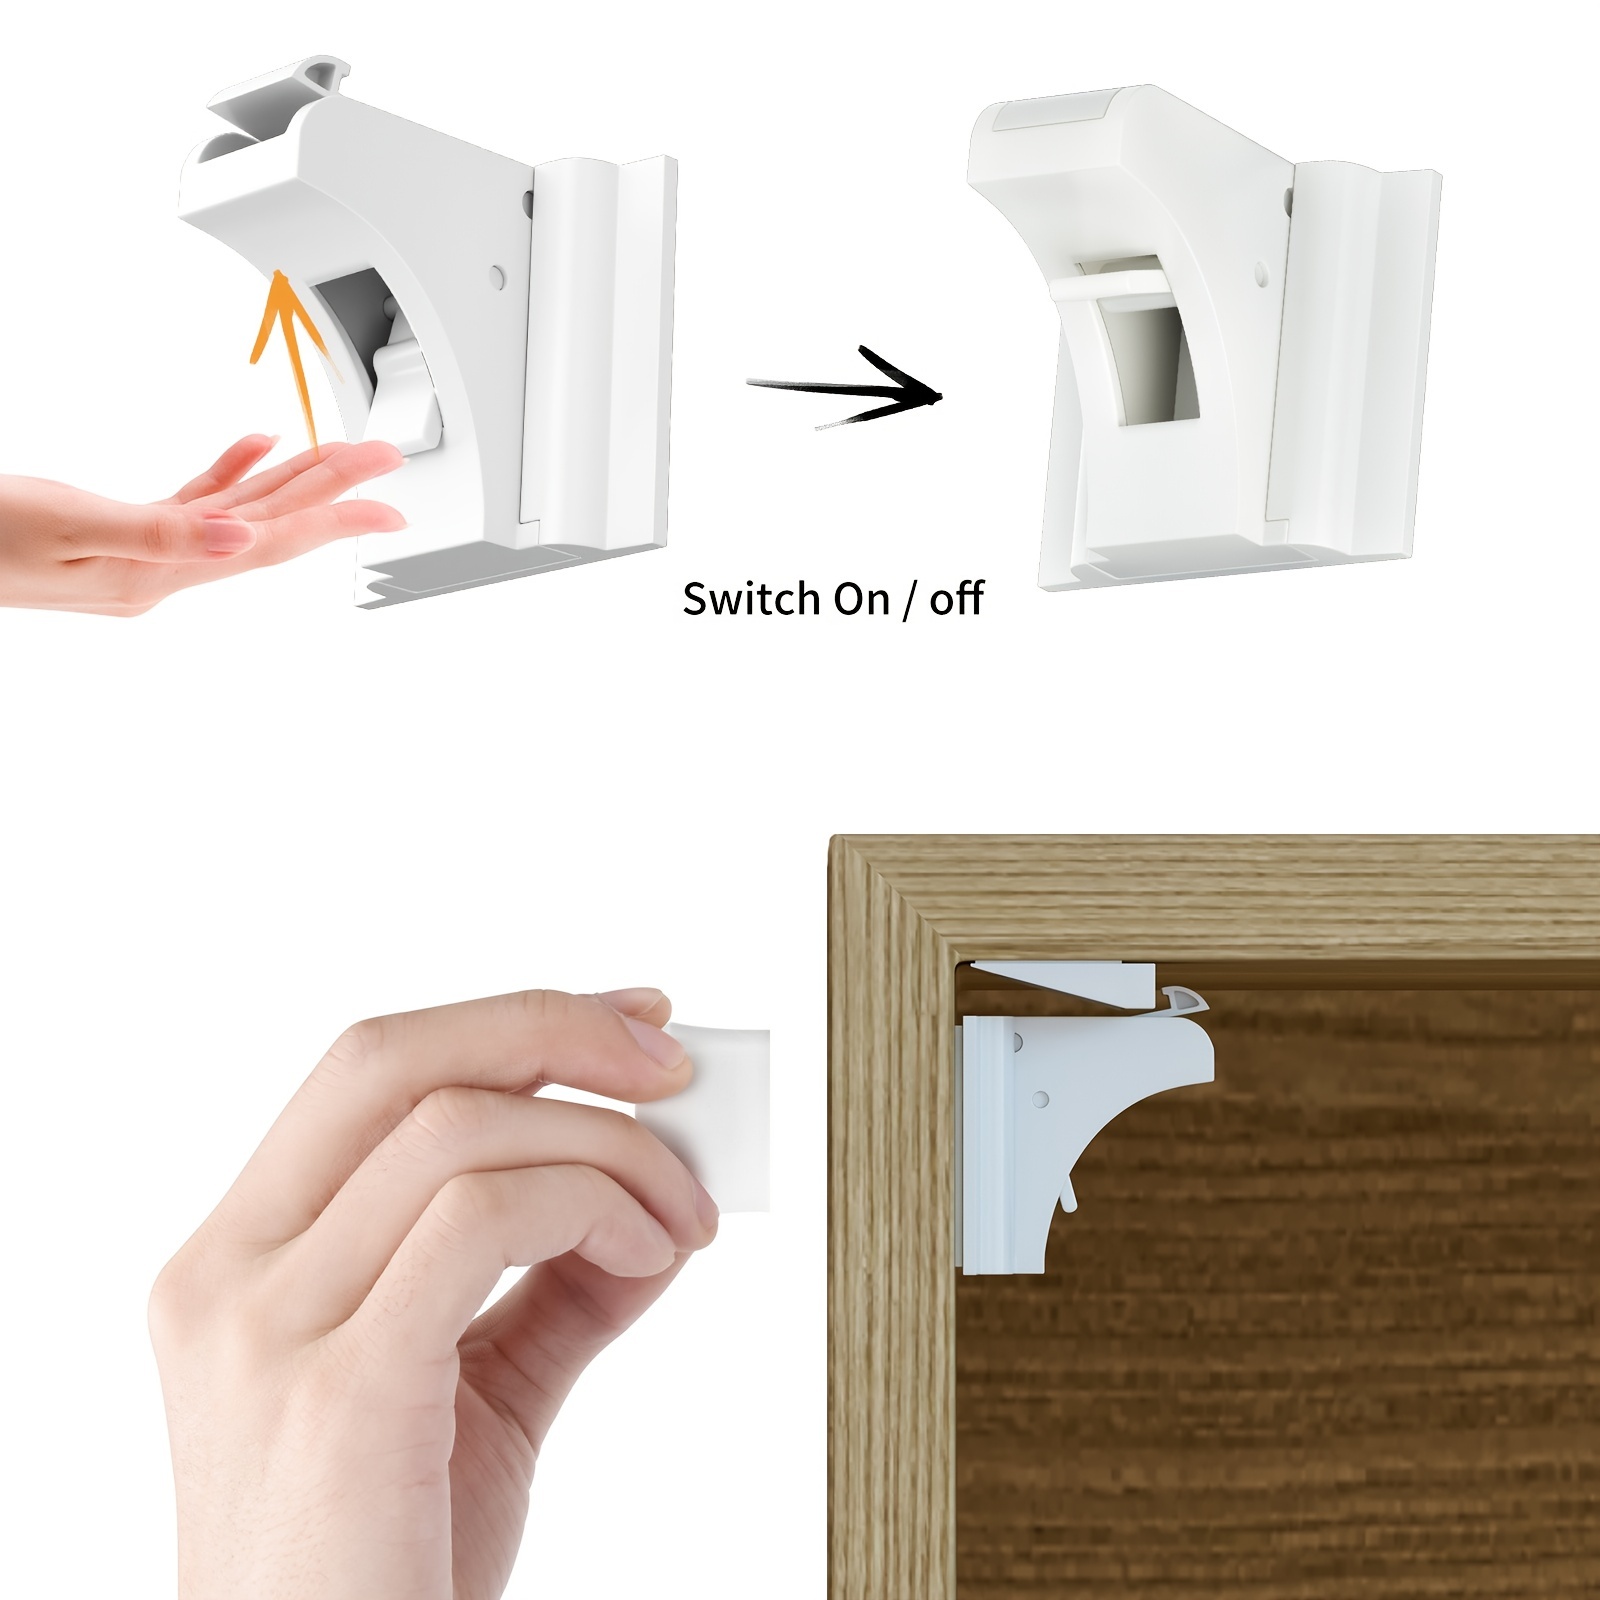 Vmaisi Child Safety Magnetic Drawer & Cabinet Locks – Vmaisi Safety